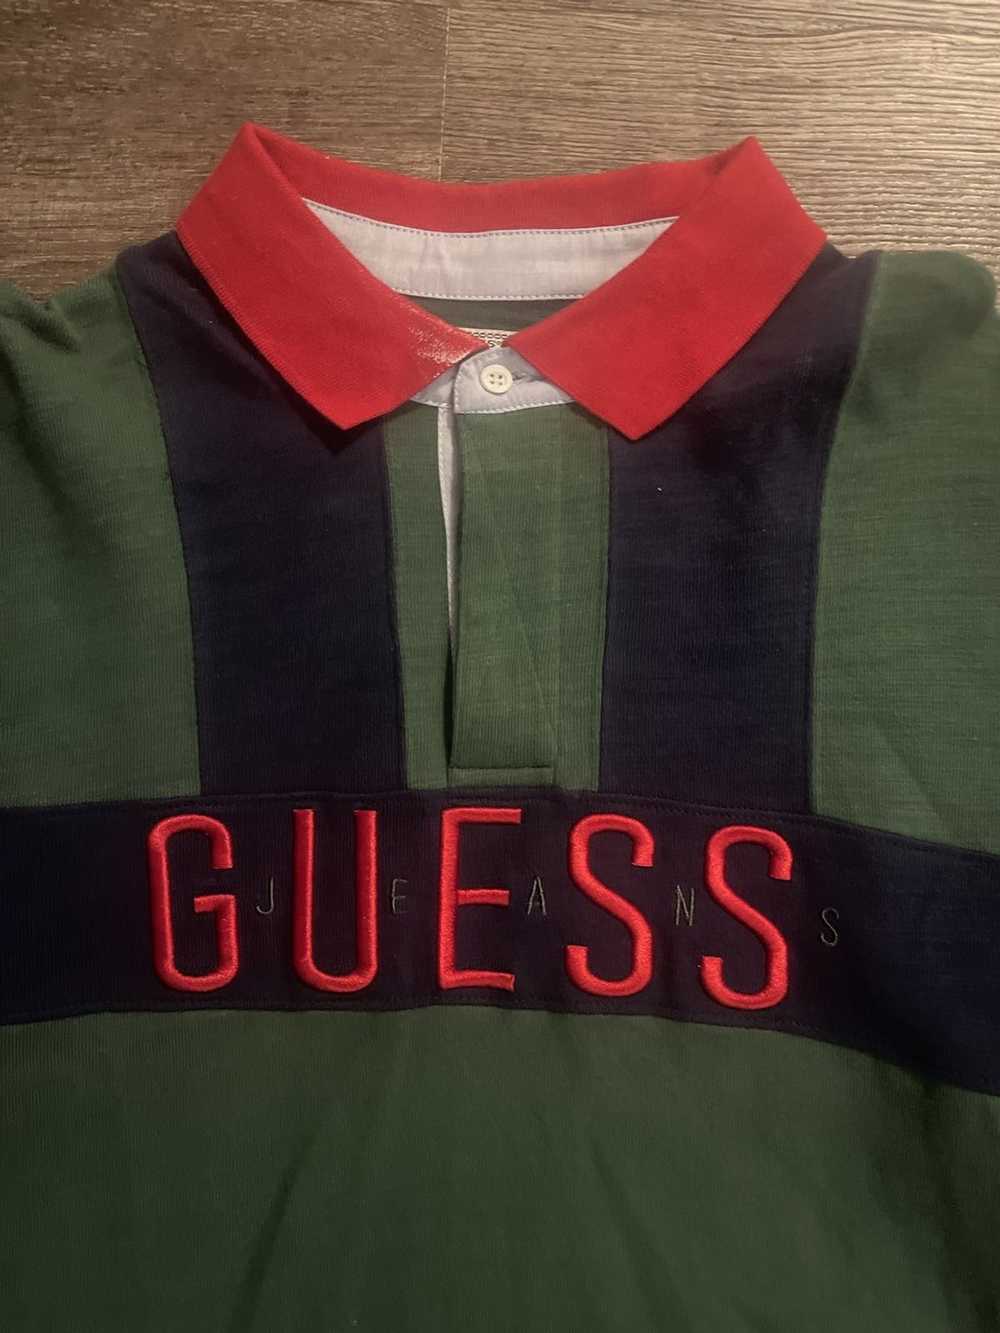 Giesswein Guess Urban outfitters vintage - image 2